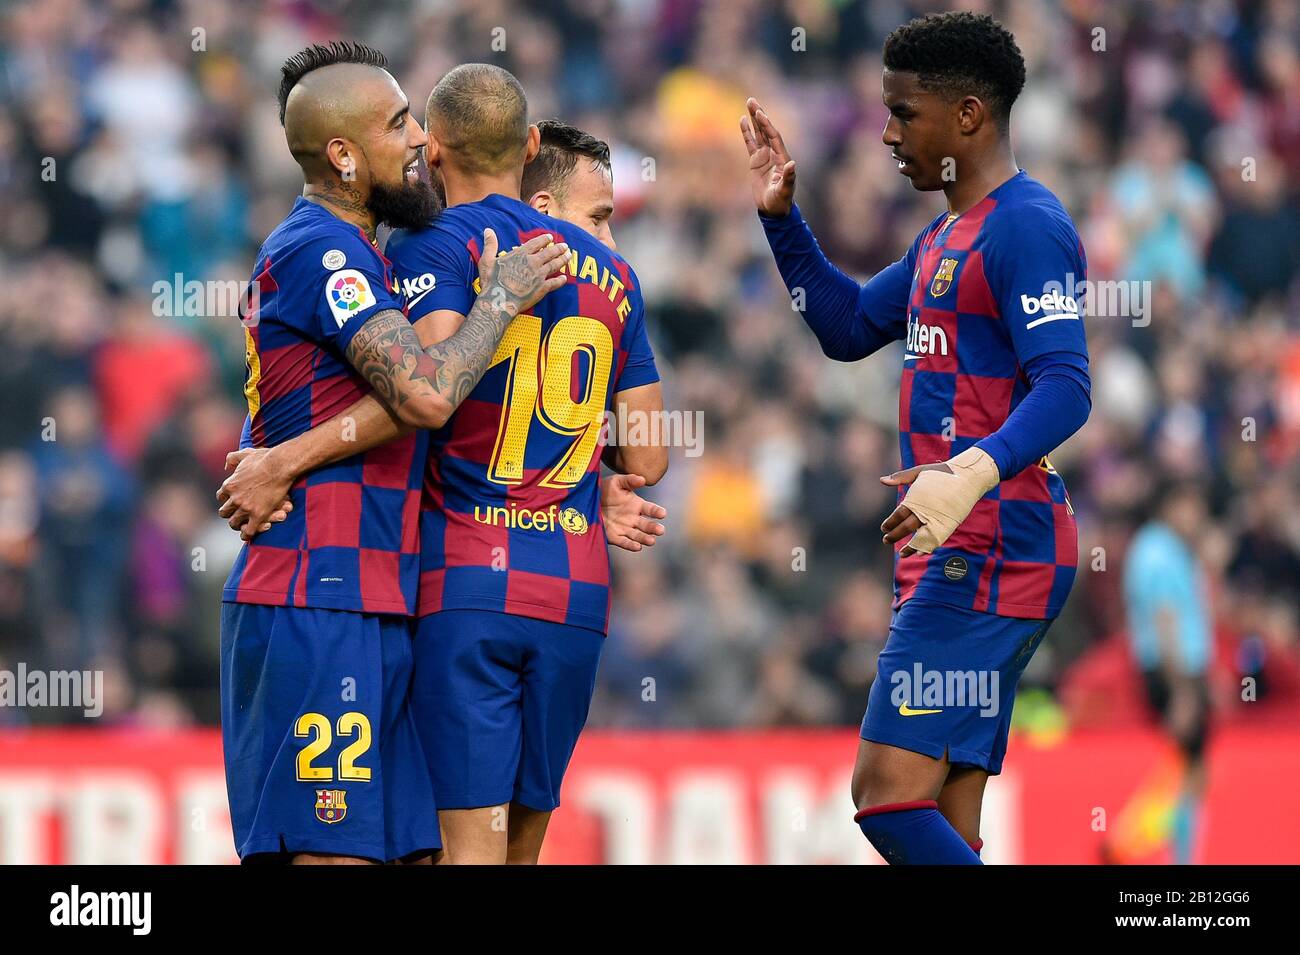 Barcelona, Spain. 22nd Feb, 2020. Arturo Vidal, Martin Braithwaite, Junior Firpo and Arthur of FC Barcelona celebrate the fifth goal during the Liga match between FC Barcelona and SD Eibar at Camp Nou on February 22, 2020 in Barcelona, Spain. Credit: Dax Images/Alamy Live News Stock Photo